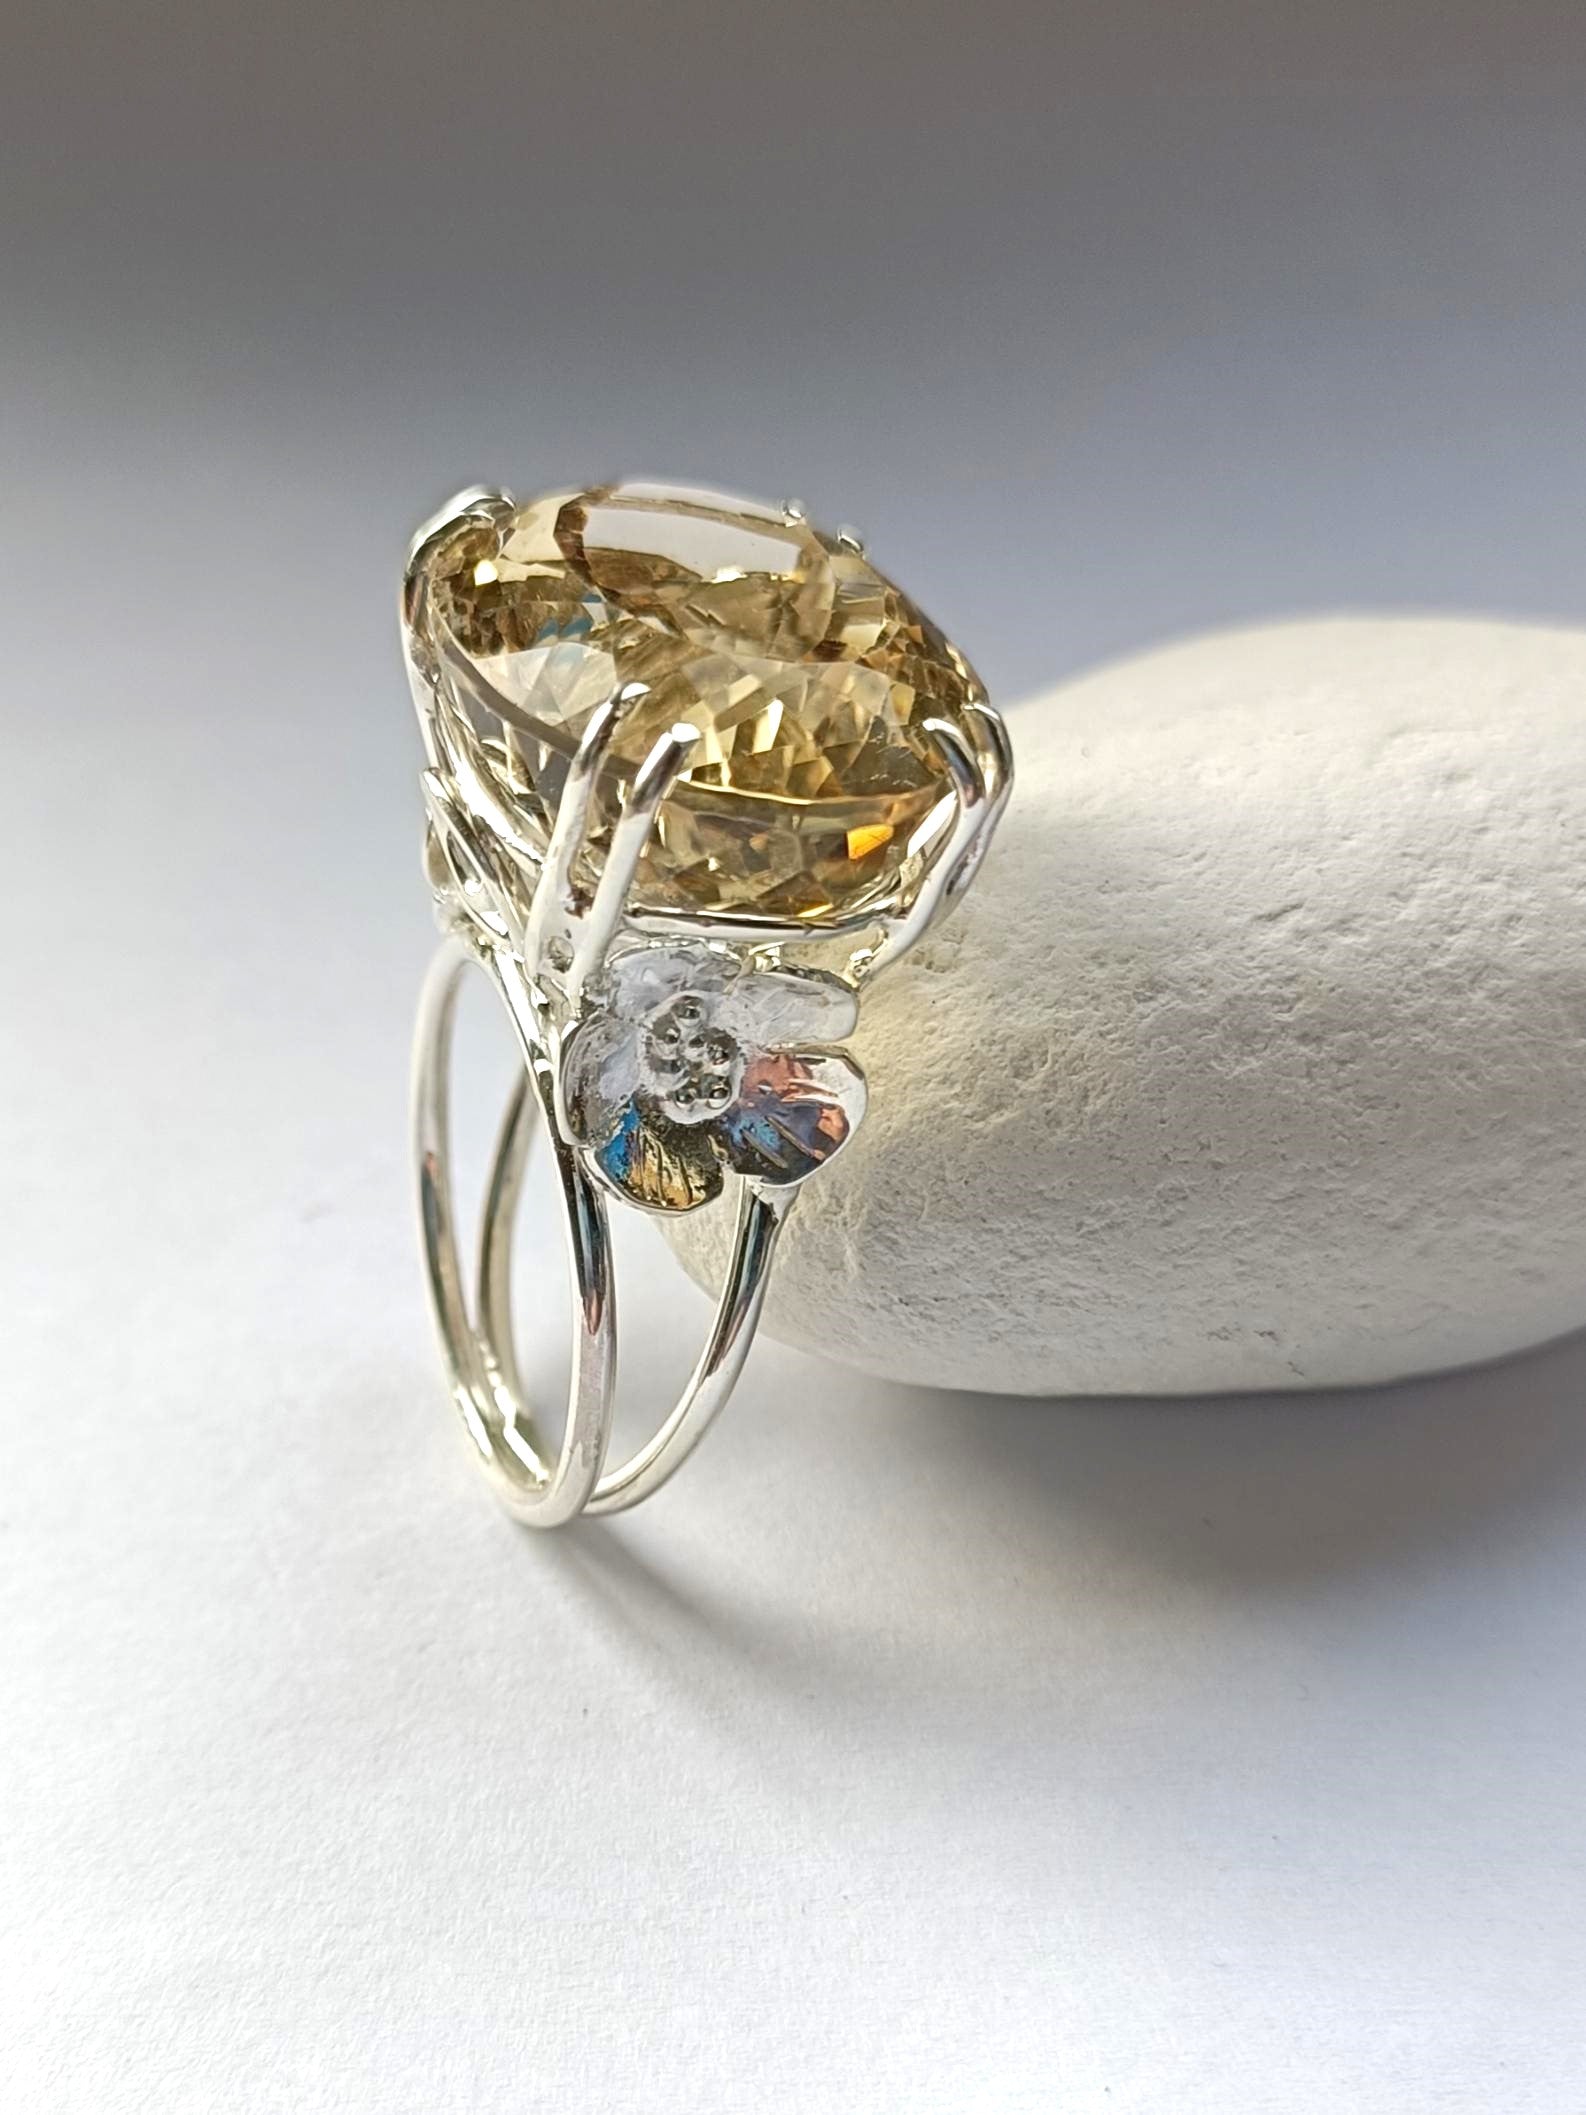 large yellow citrine  prong setting ring with flower details, resting on white pebble